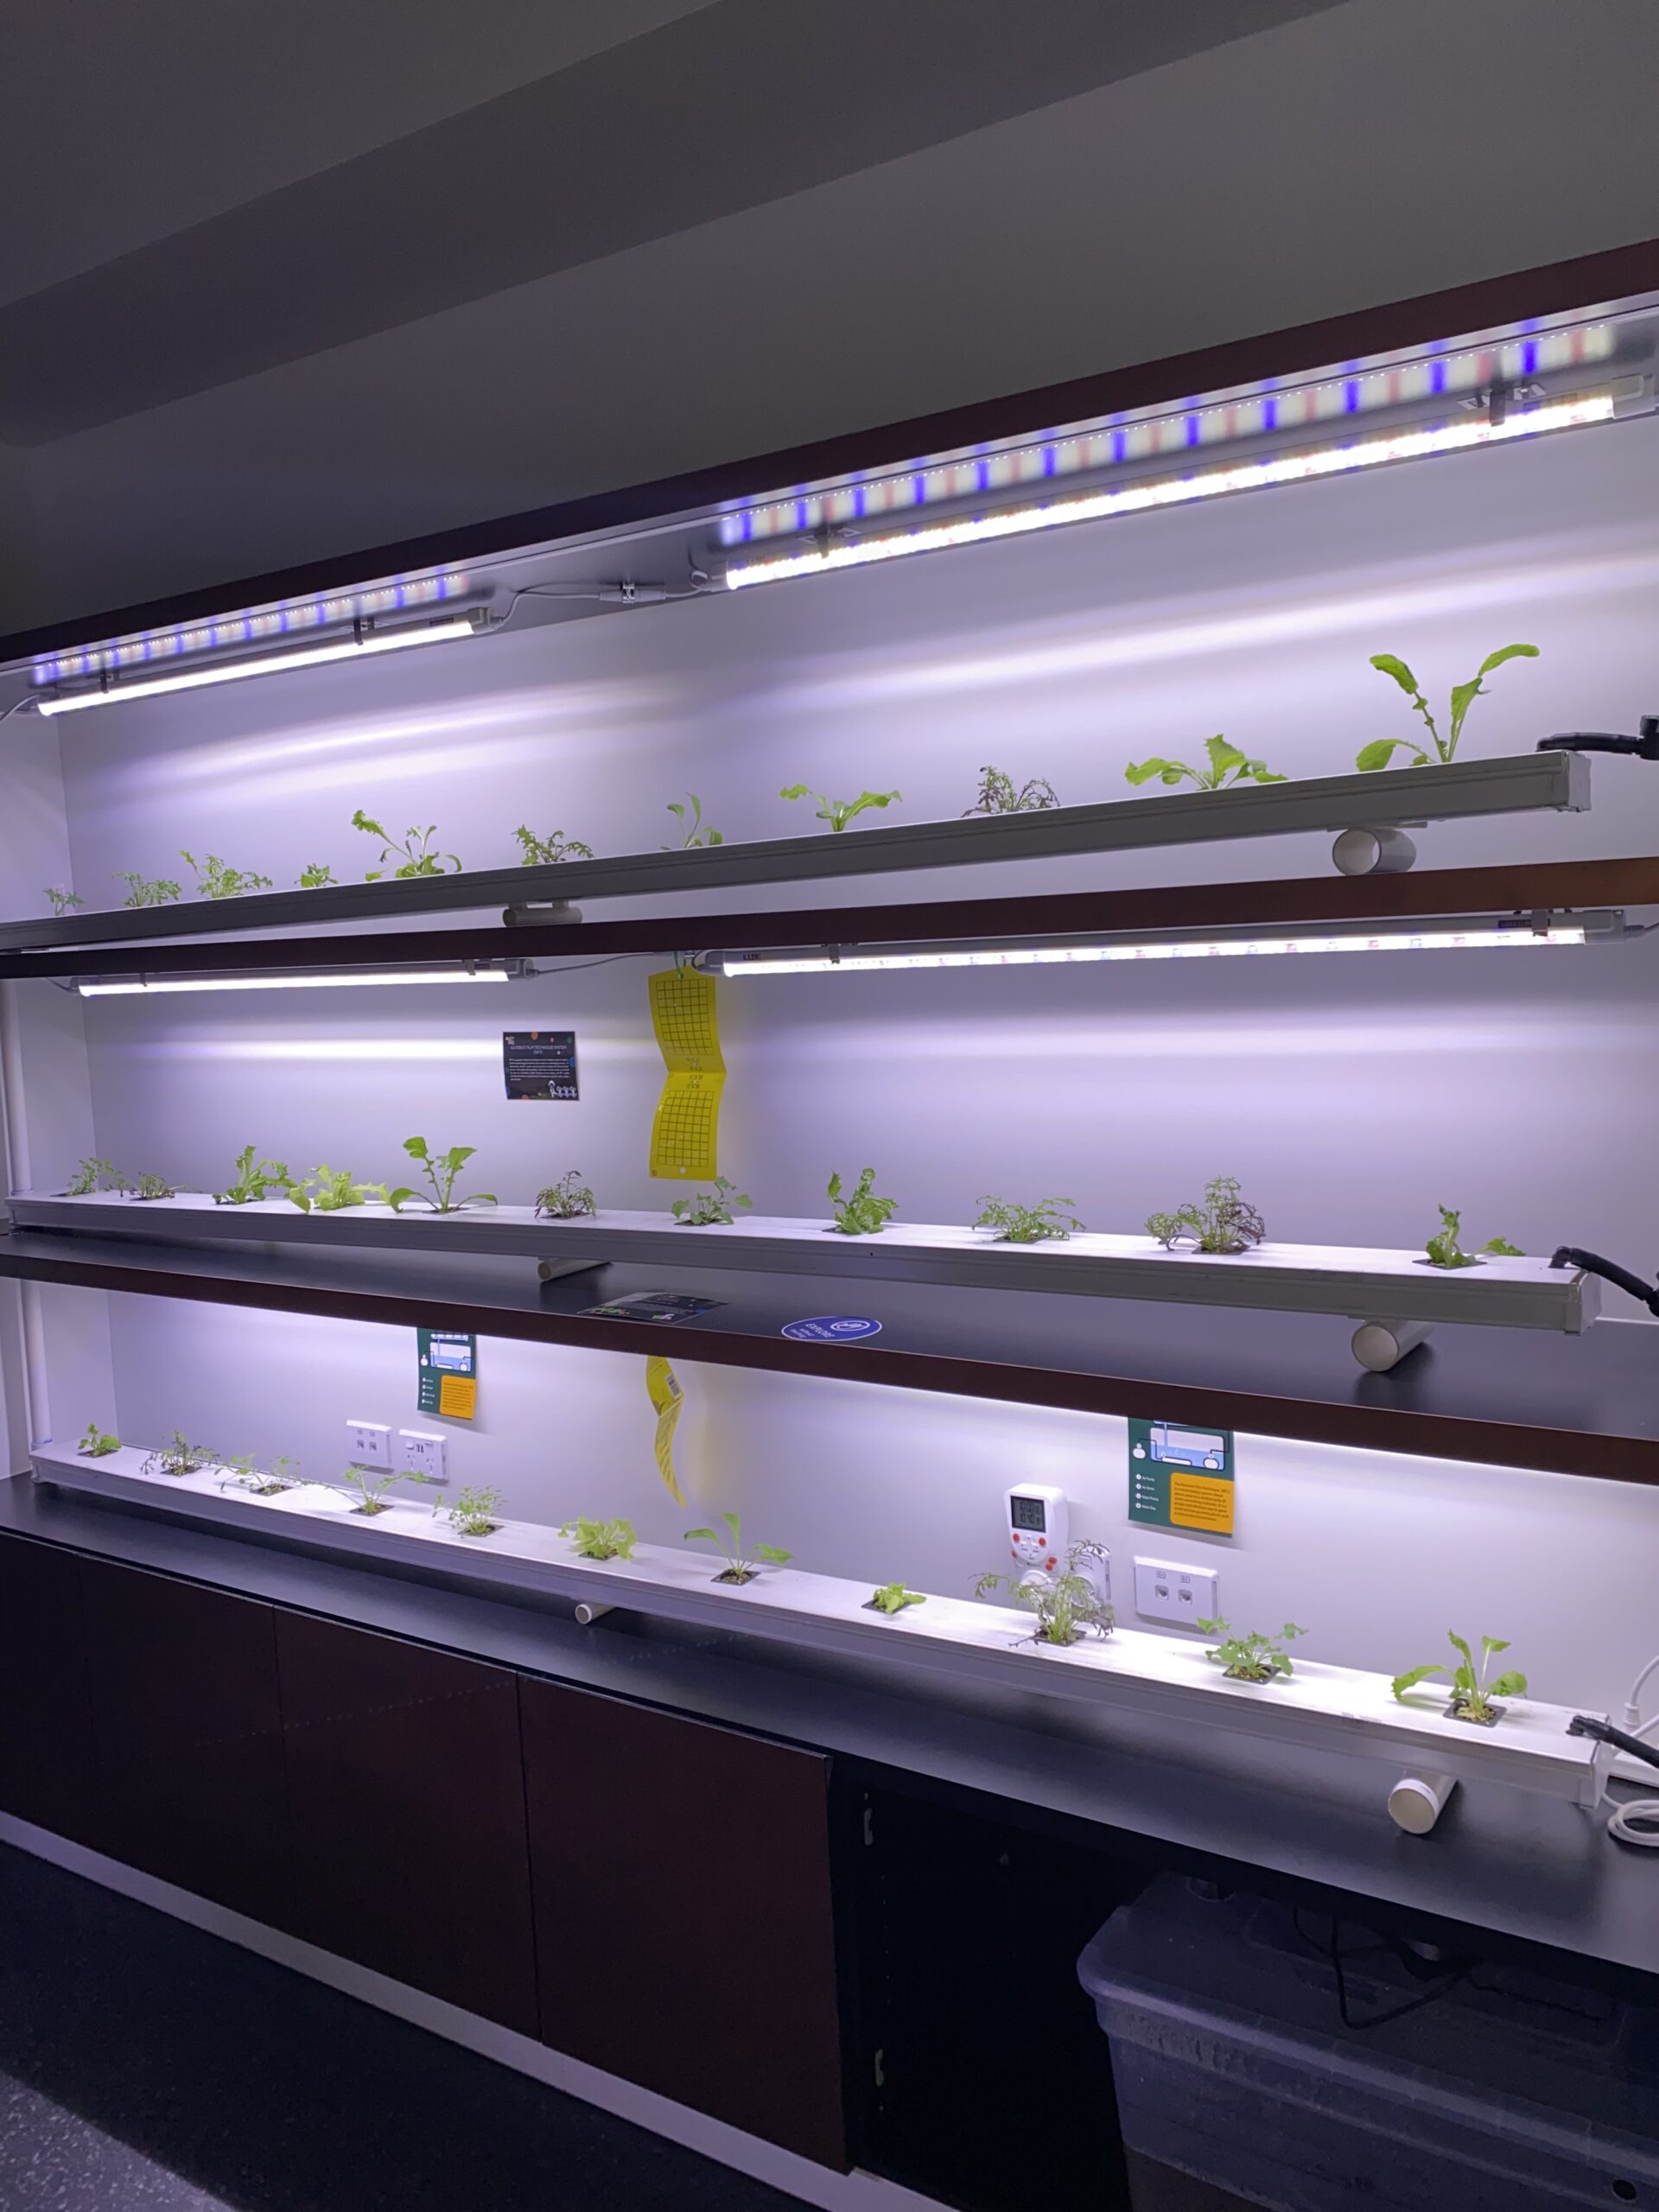 Plants in Space: Resources